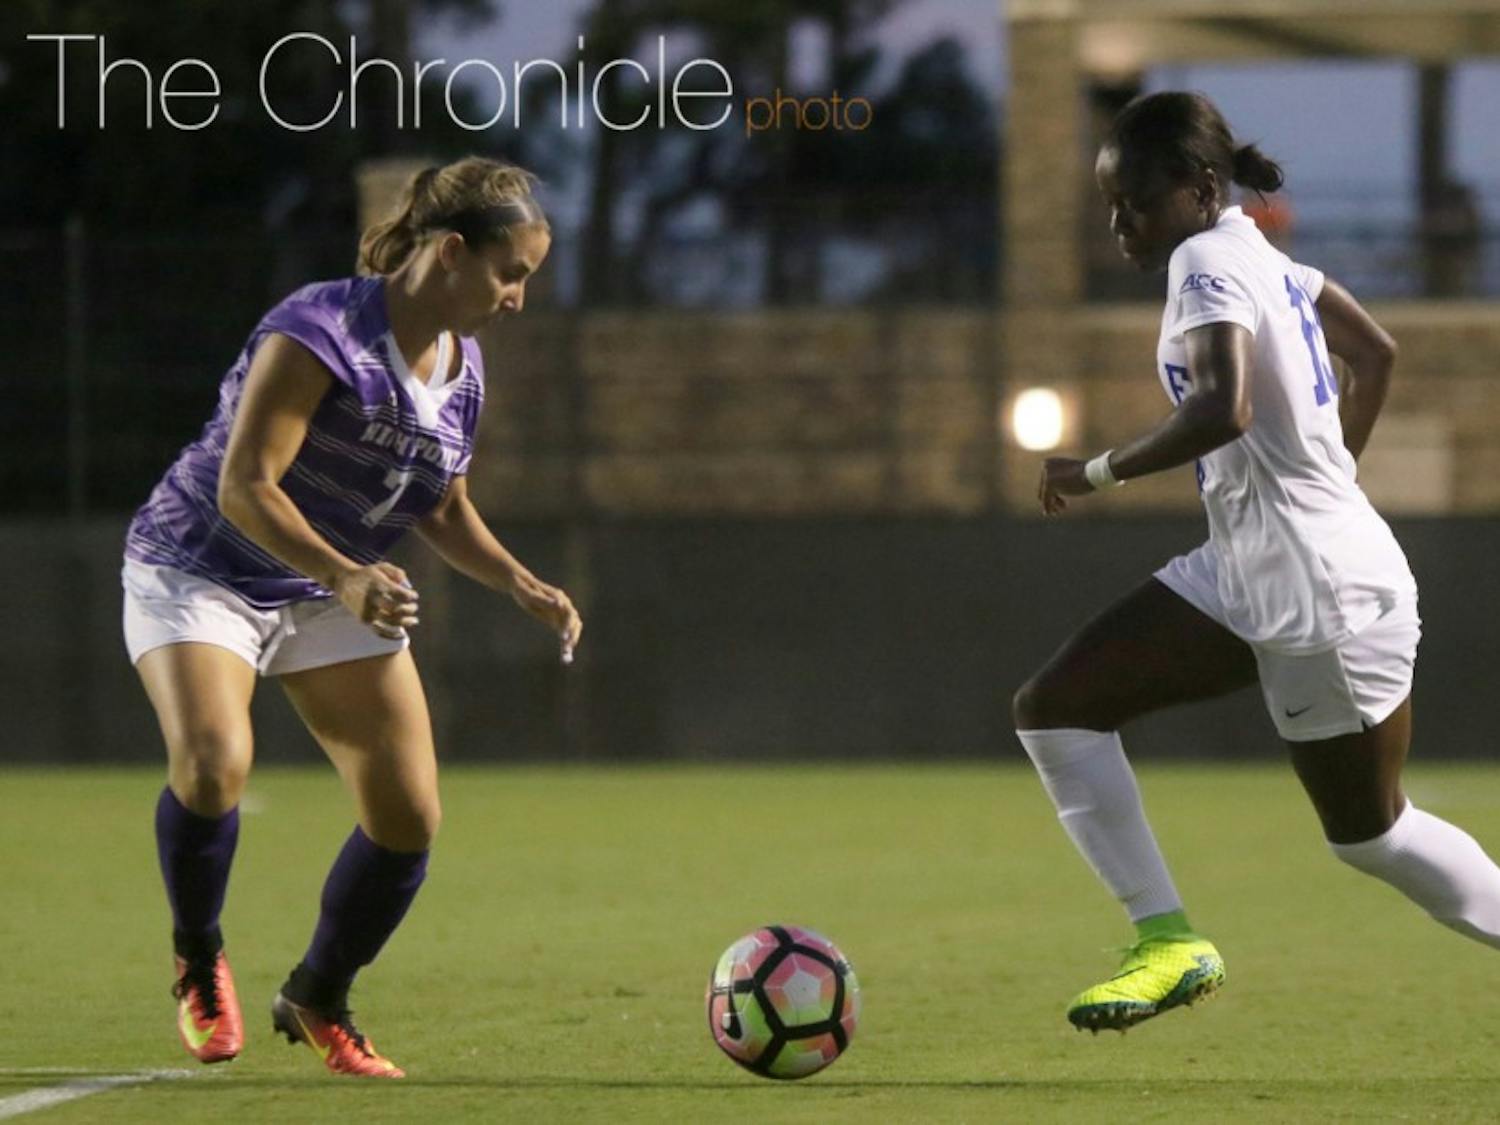 Senior Toni Payne had a goal and an assist Sunday evening as the Blue Devils wrapped up nonconference play.